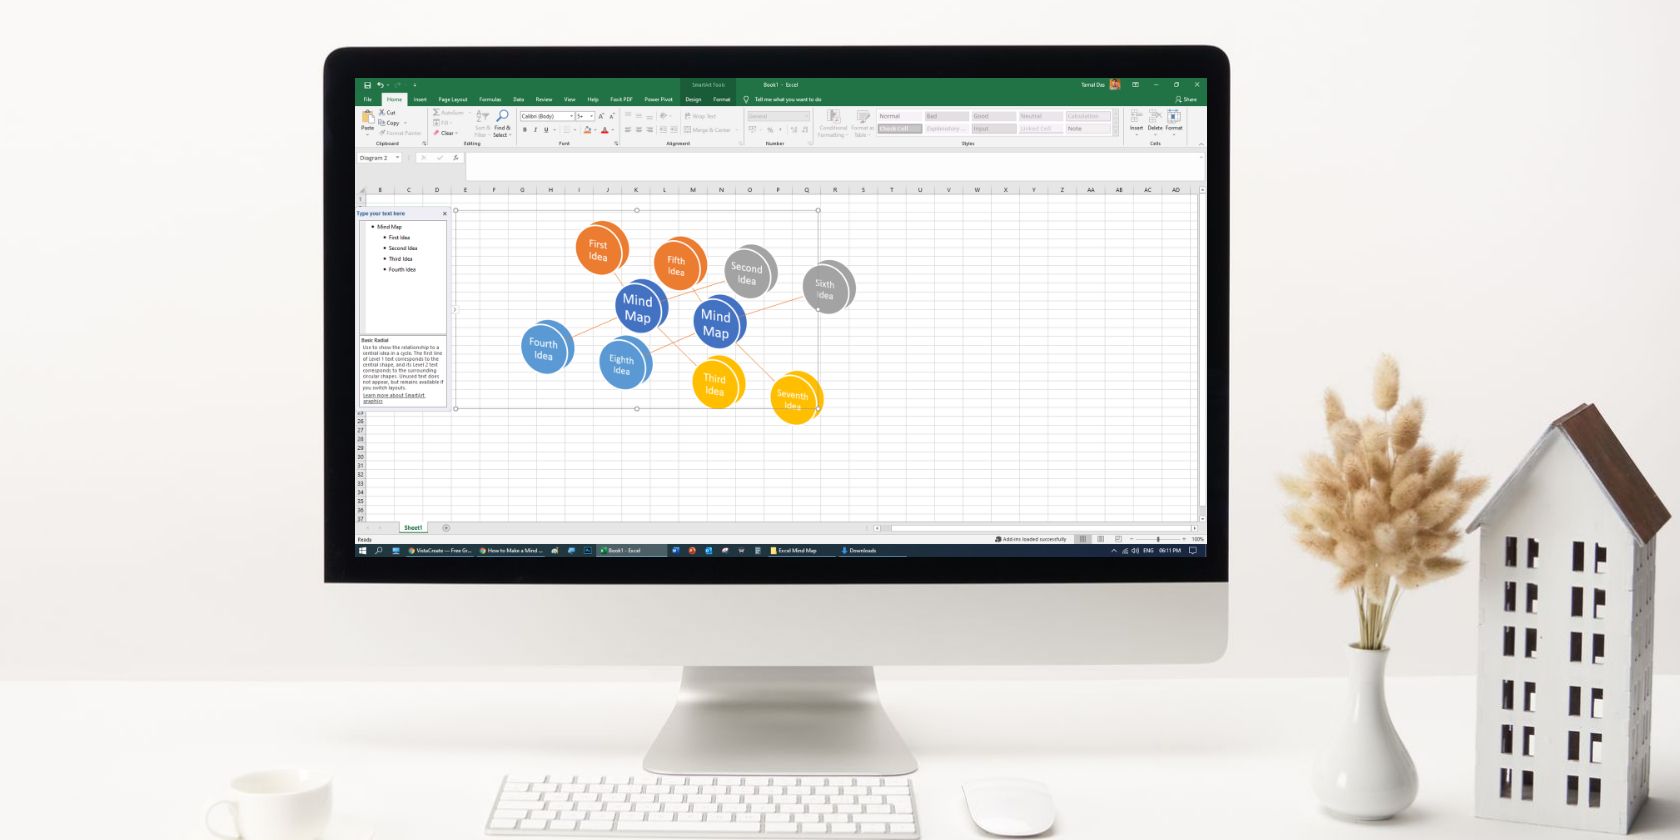 How to Make a Mind Map in Excel: 5 Easy Methods